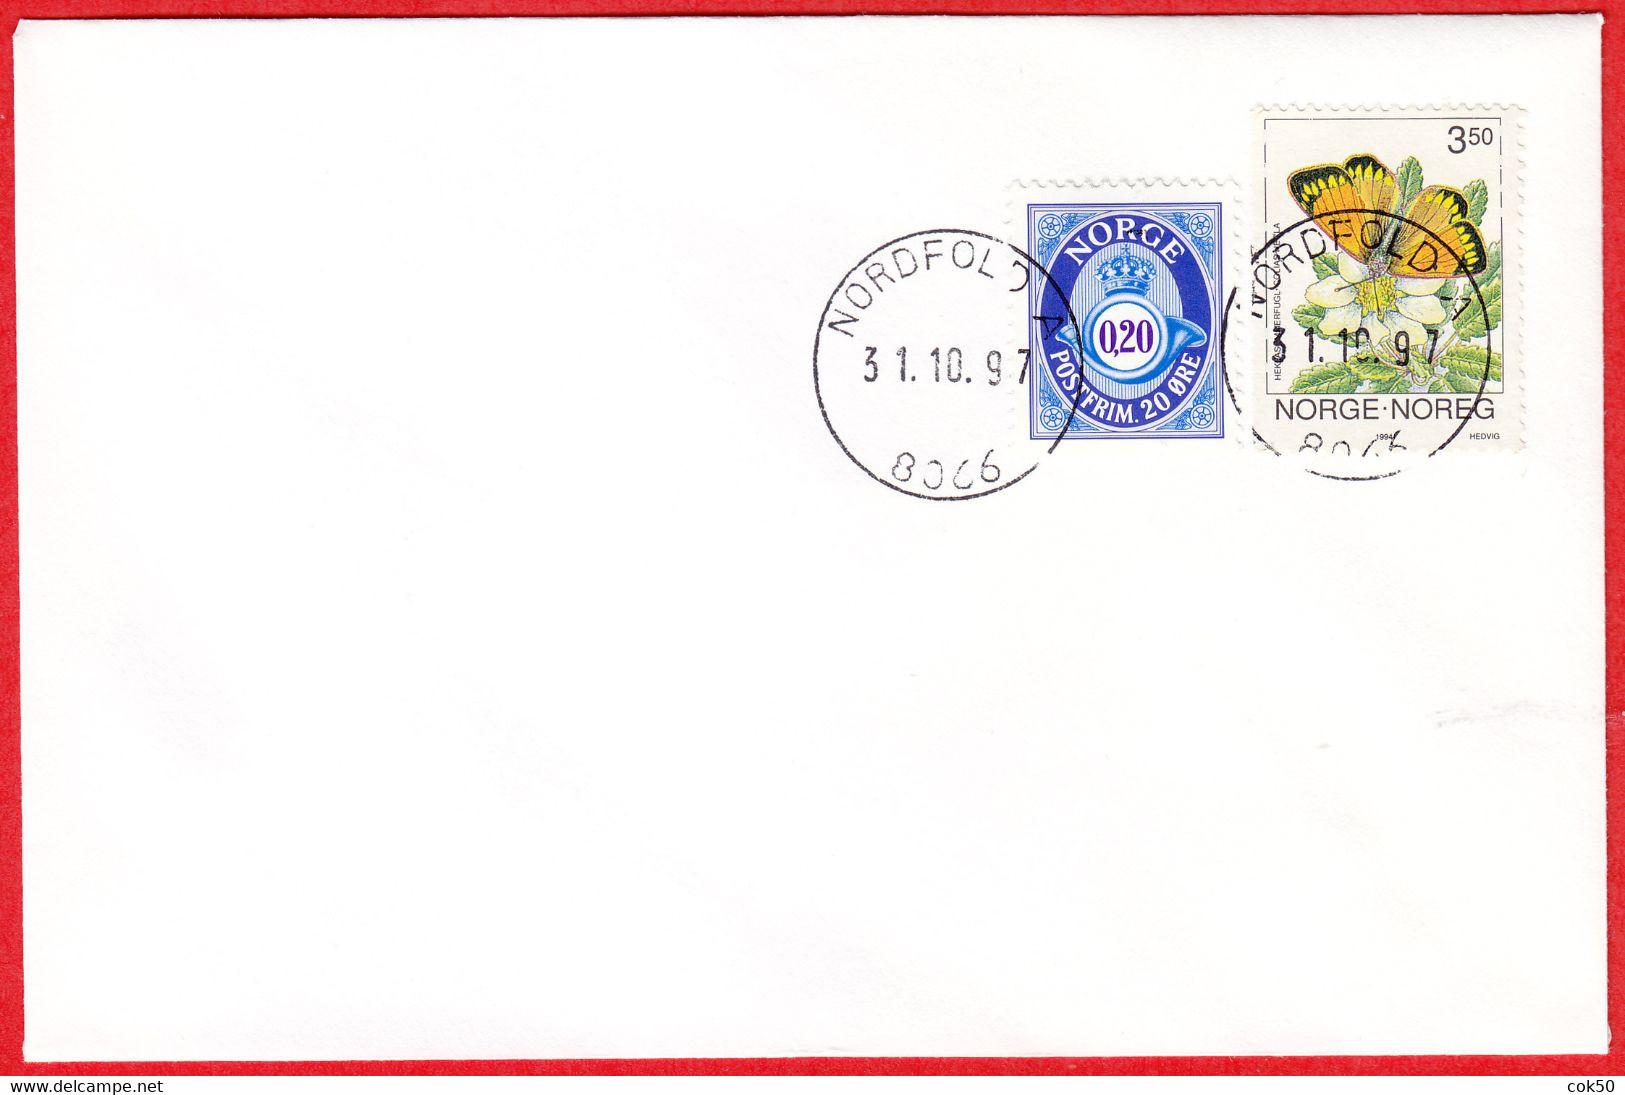 NORWAY -  8066 NORDFOLD A - 24 MmØ - (Nordland County) - Last Day/postoffice Closed On 1997.10.31 - Lokale Uitgaven